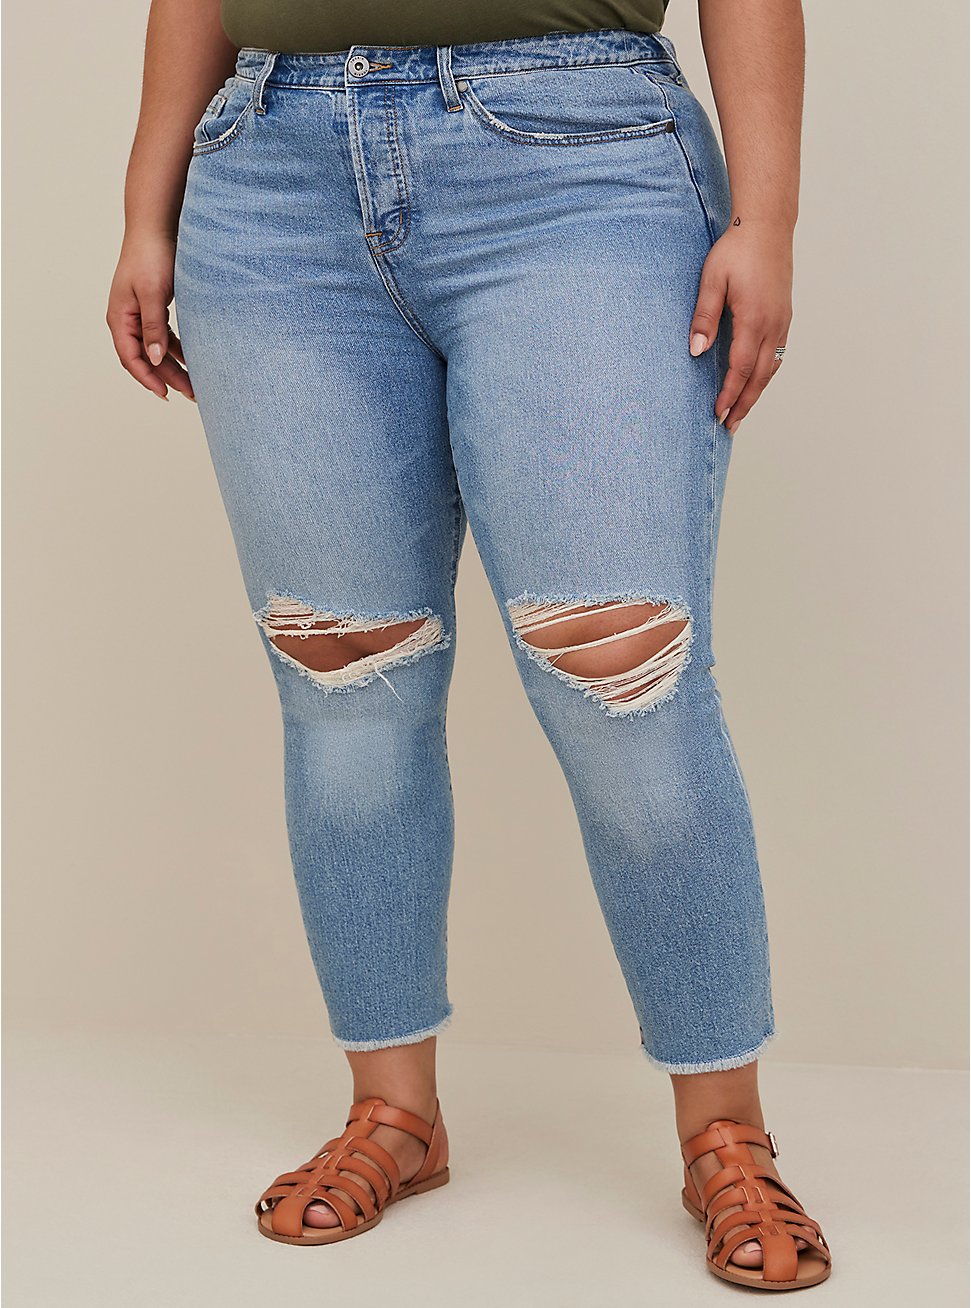 Plus Size High-Rise Straight Jean – Classic Denim Medium Wash, HAPPINESS FORGETS, hi-res